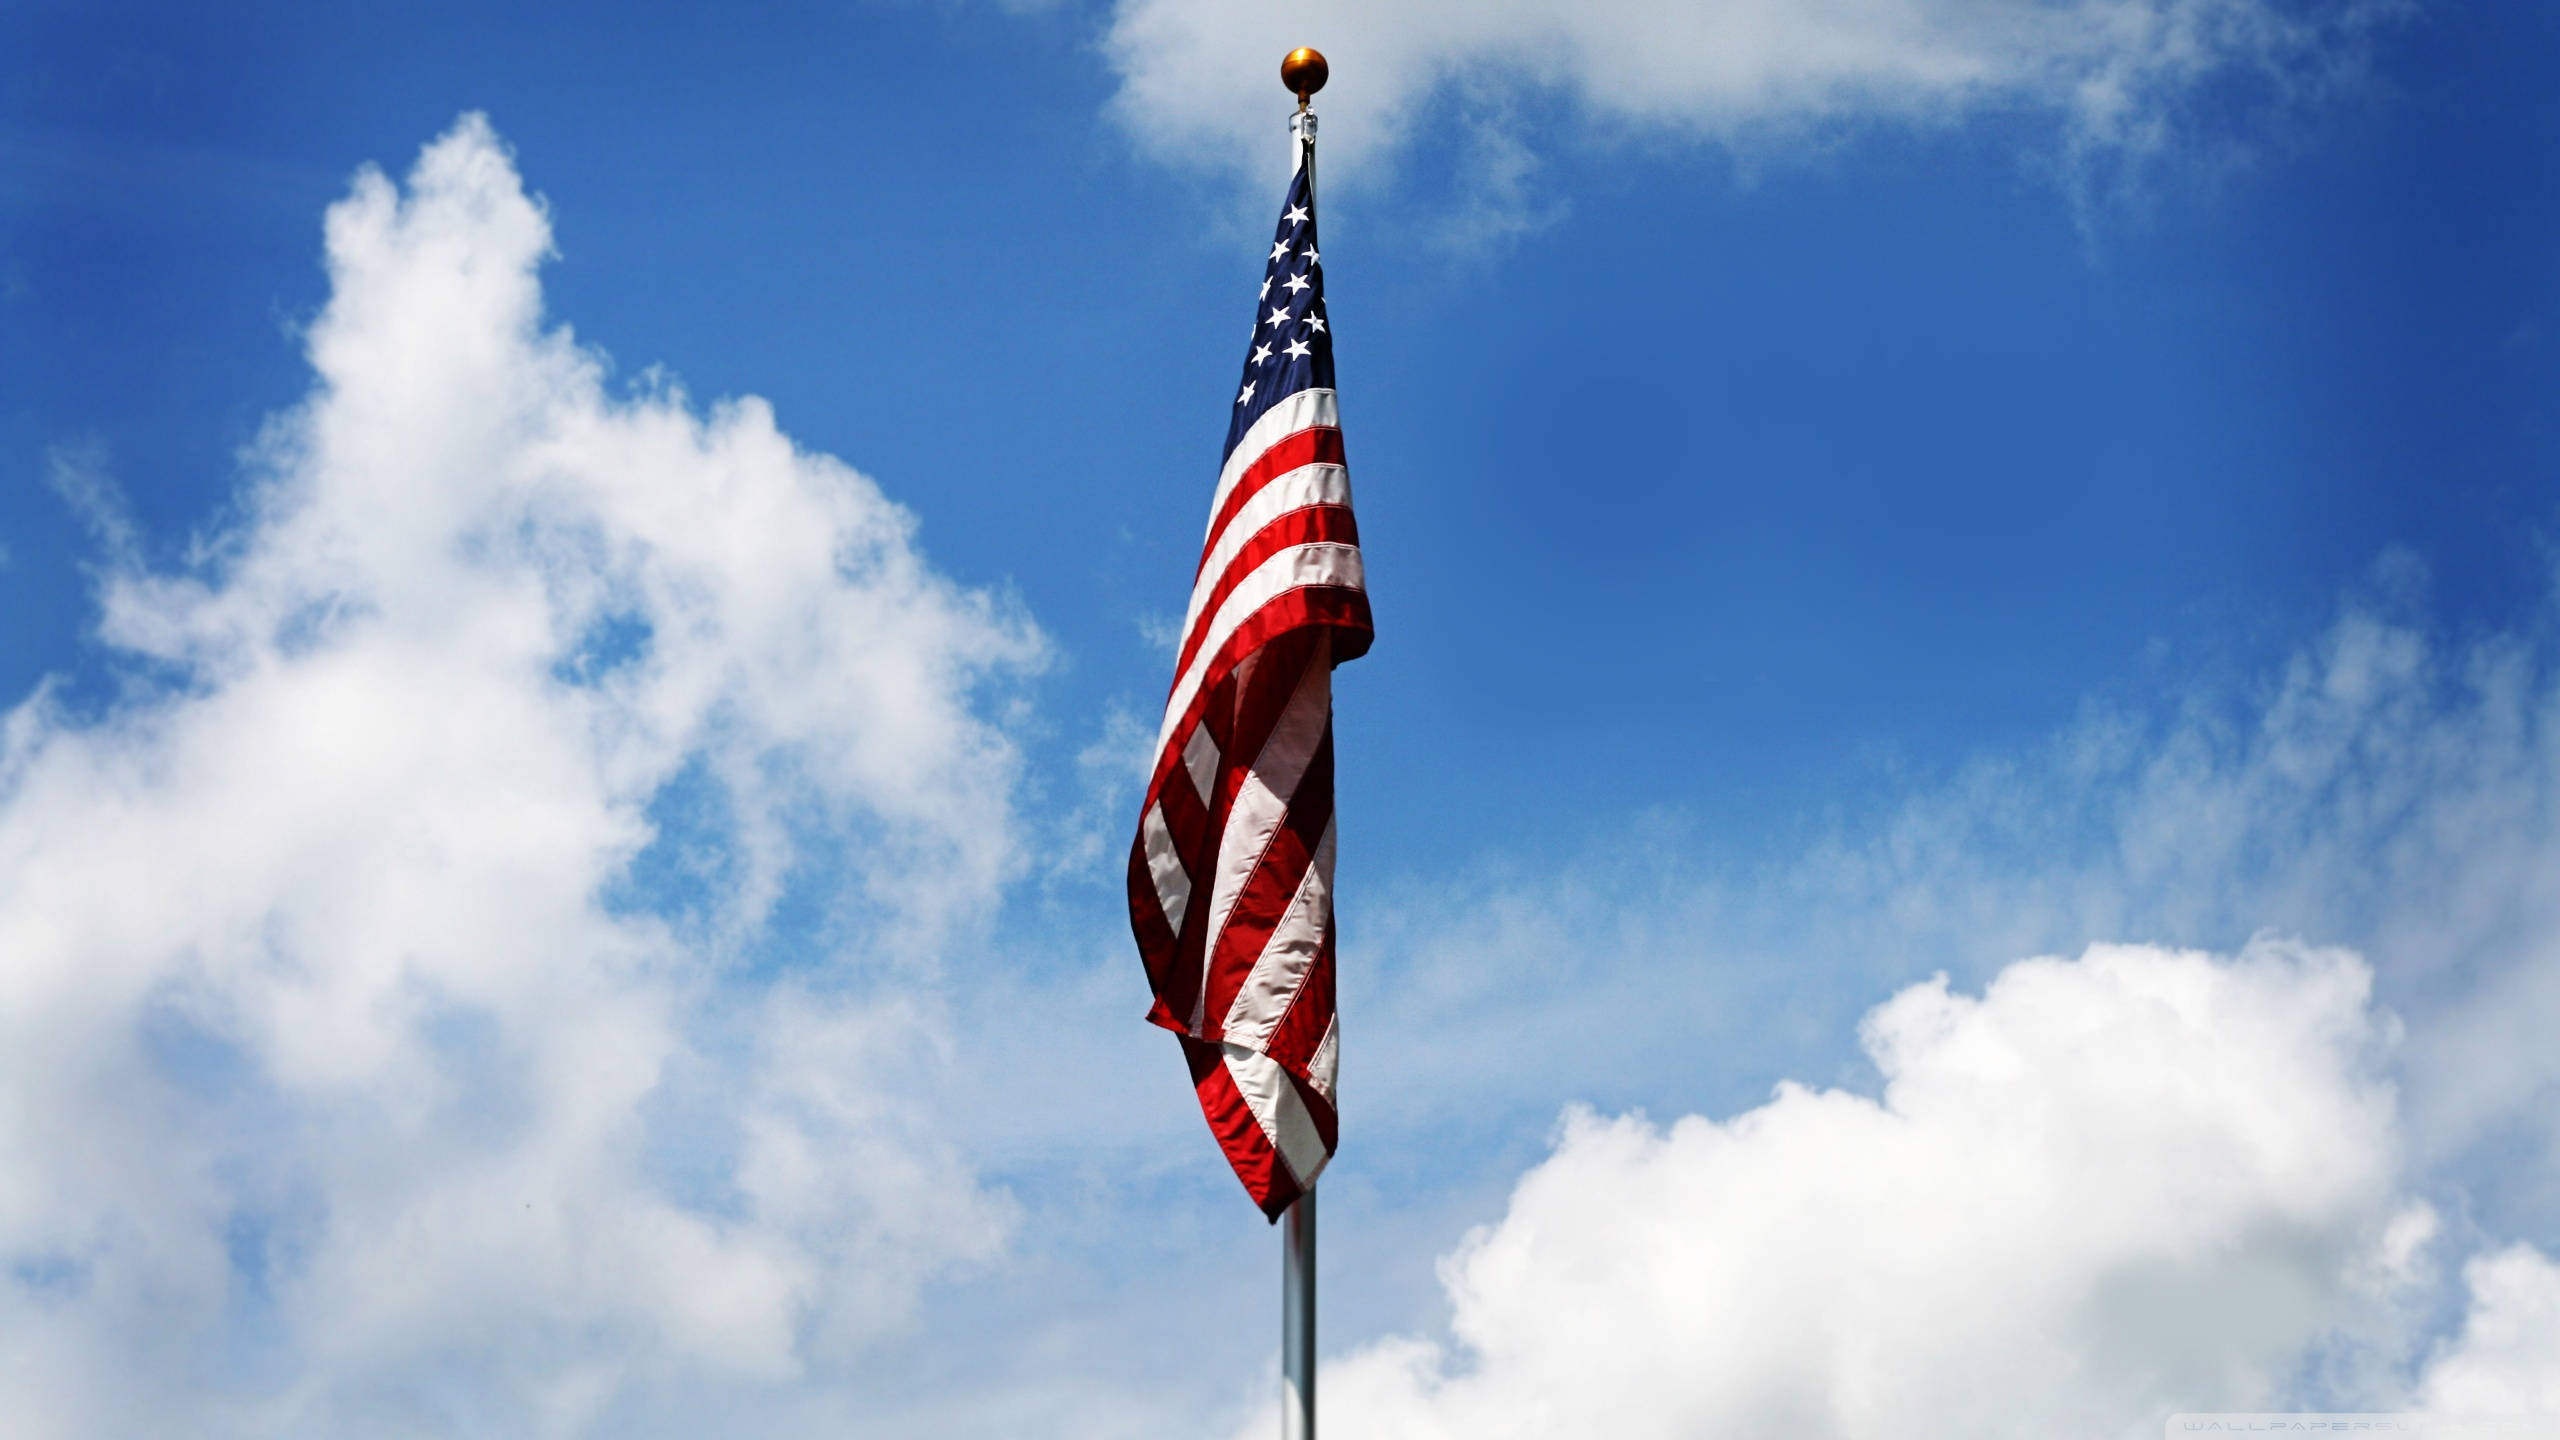 American Flag Hd On Clear Day Background